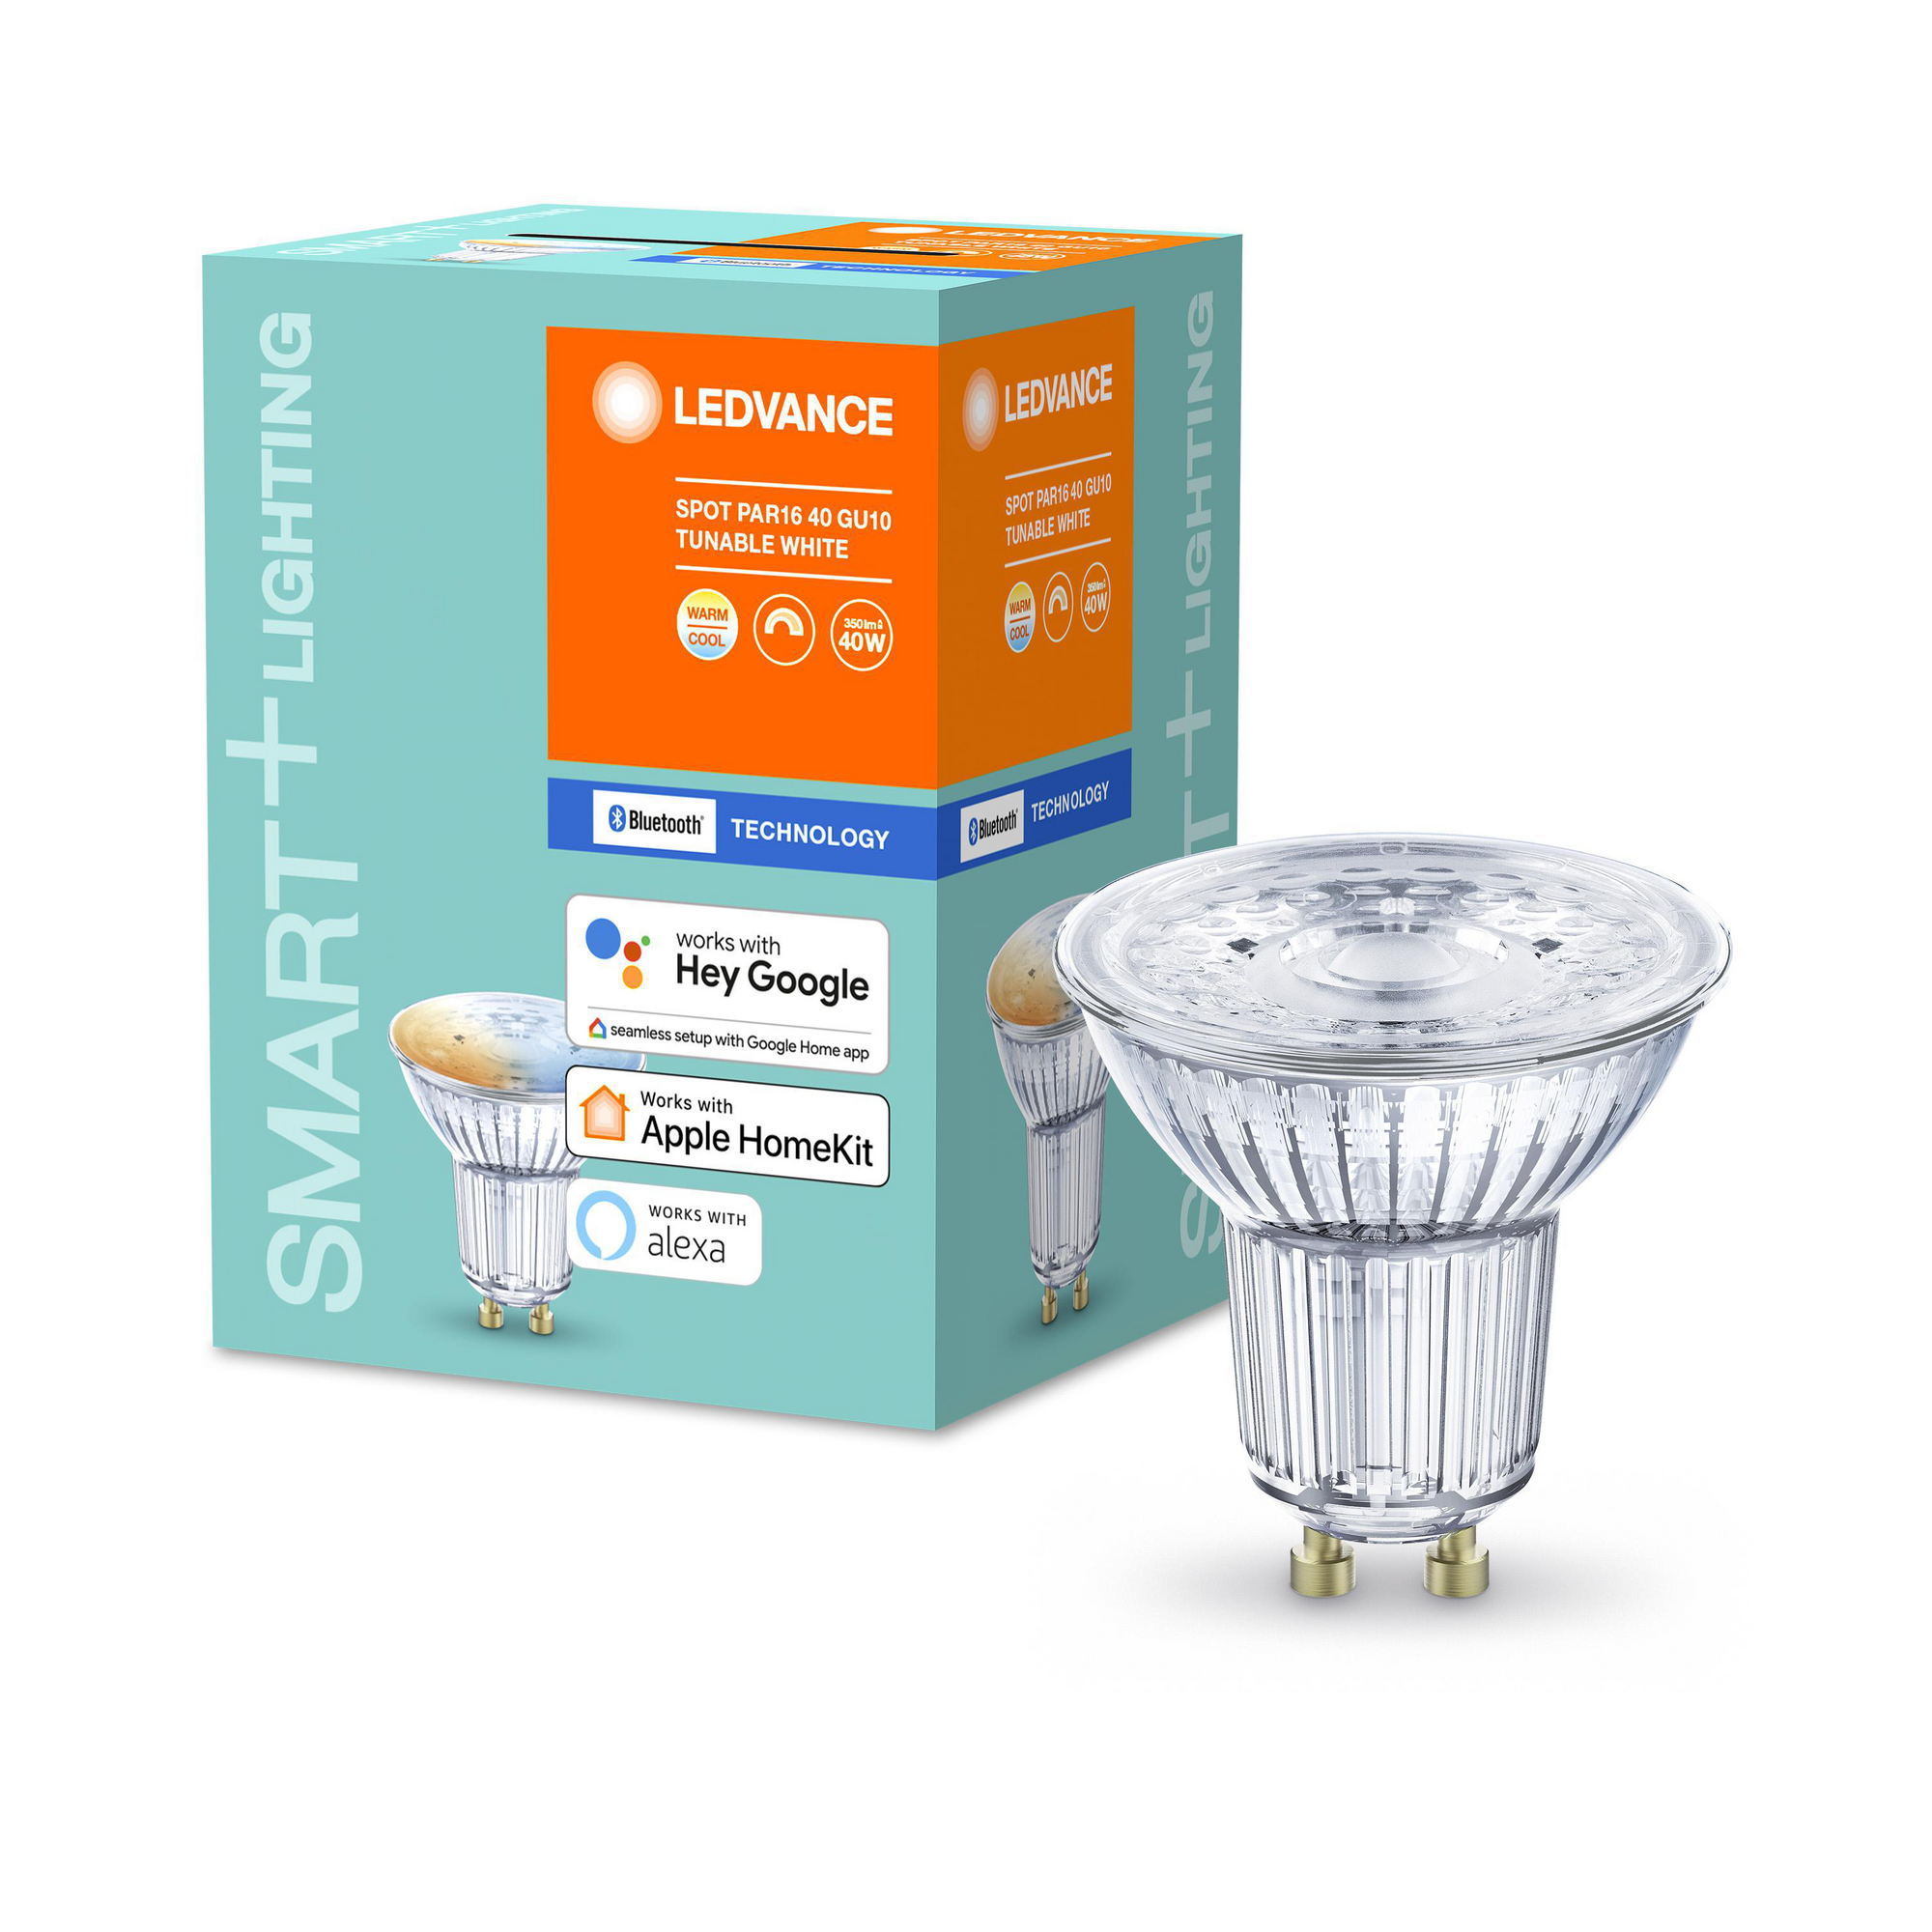 LED-Reflektorlampe 'Smart+' 5,5 cm 350 lm 5 W GU10 transparent Bluetooth Tunable White + product picture